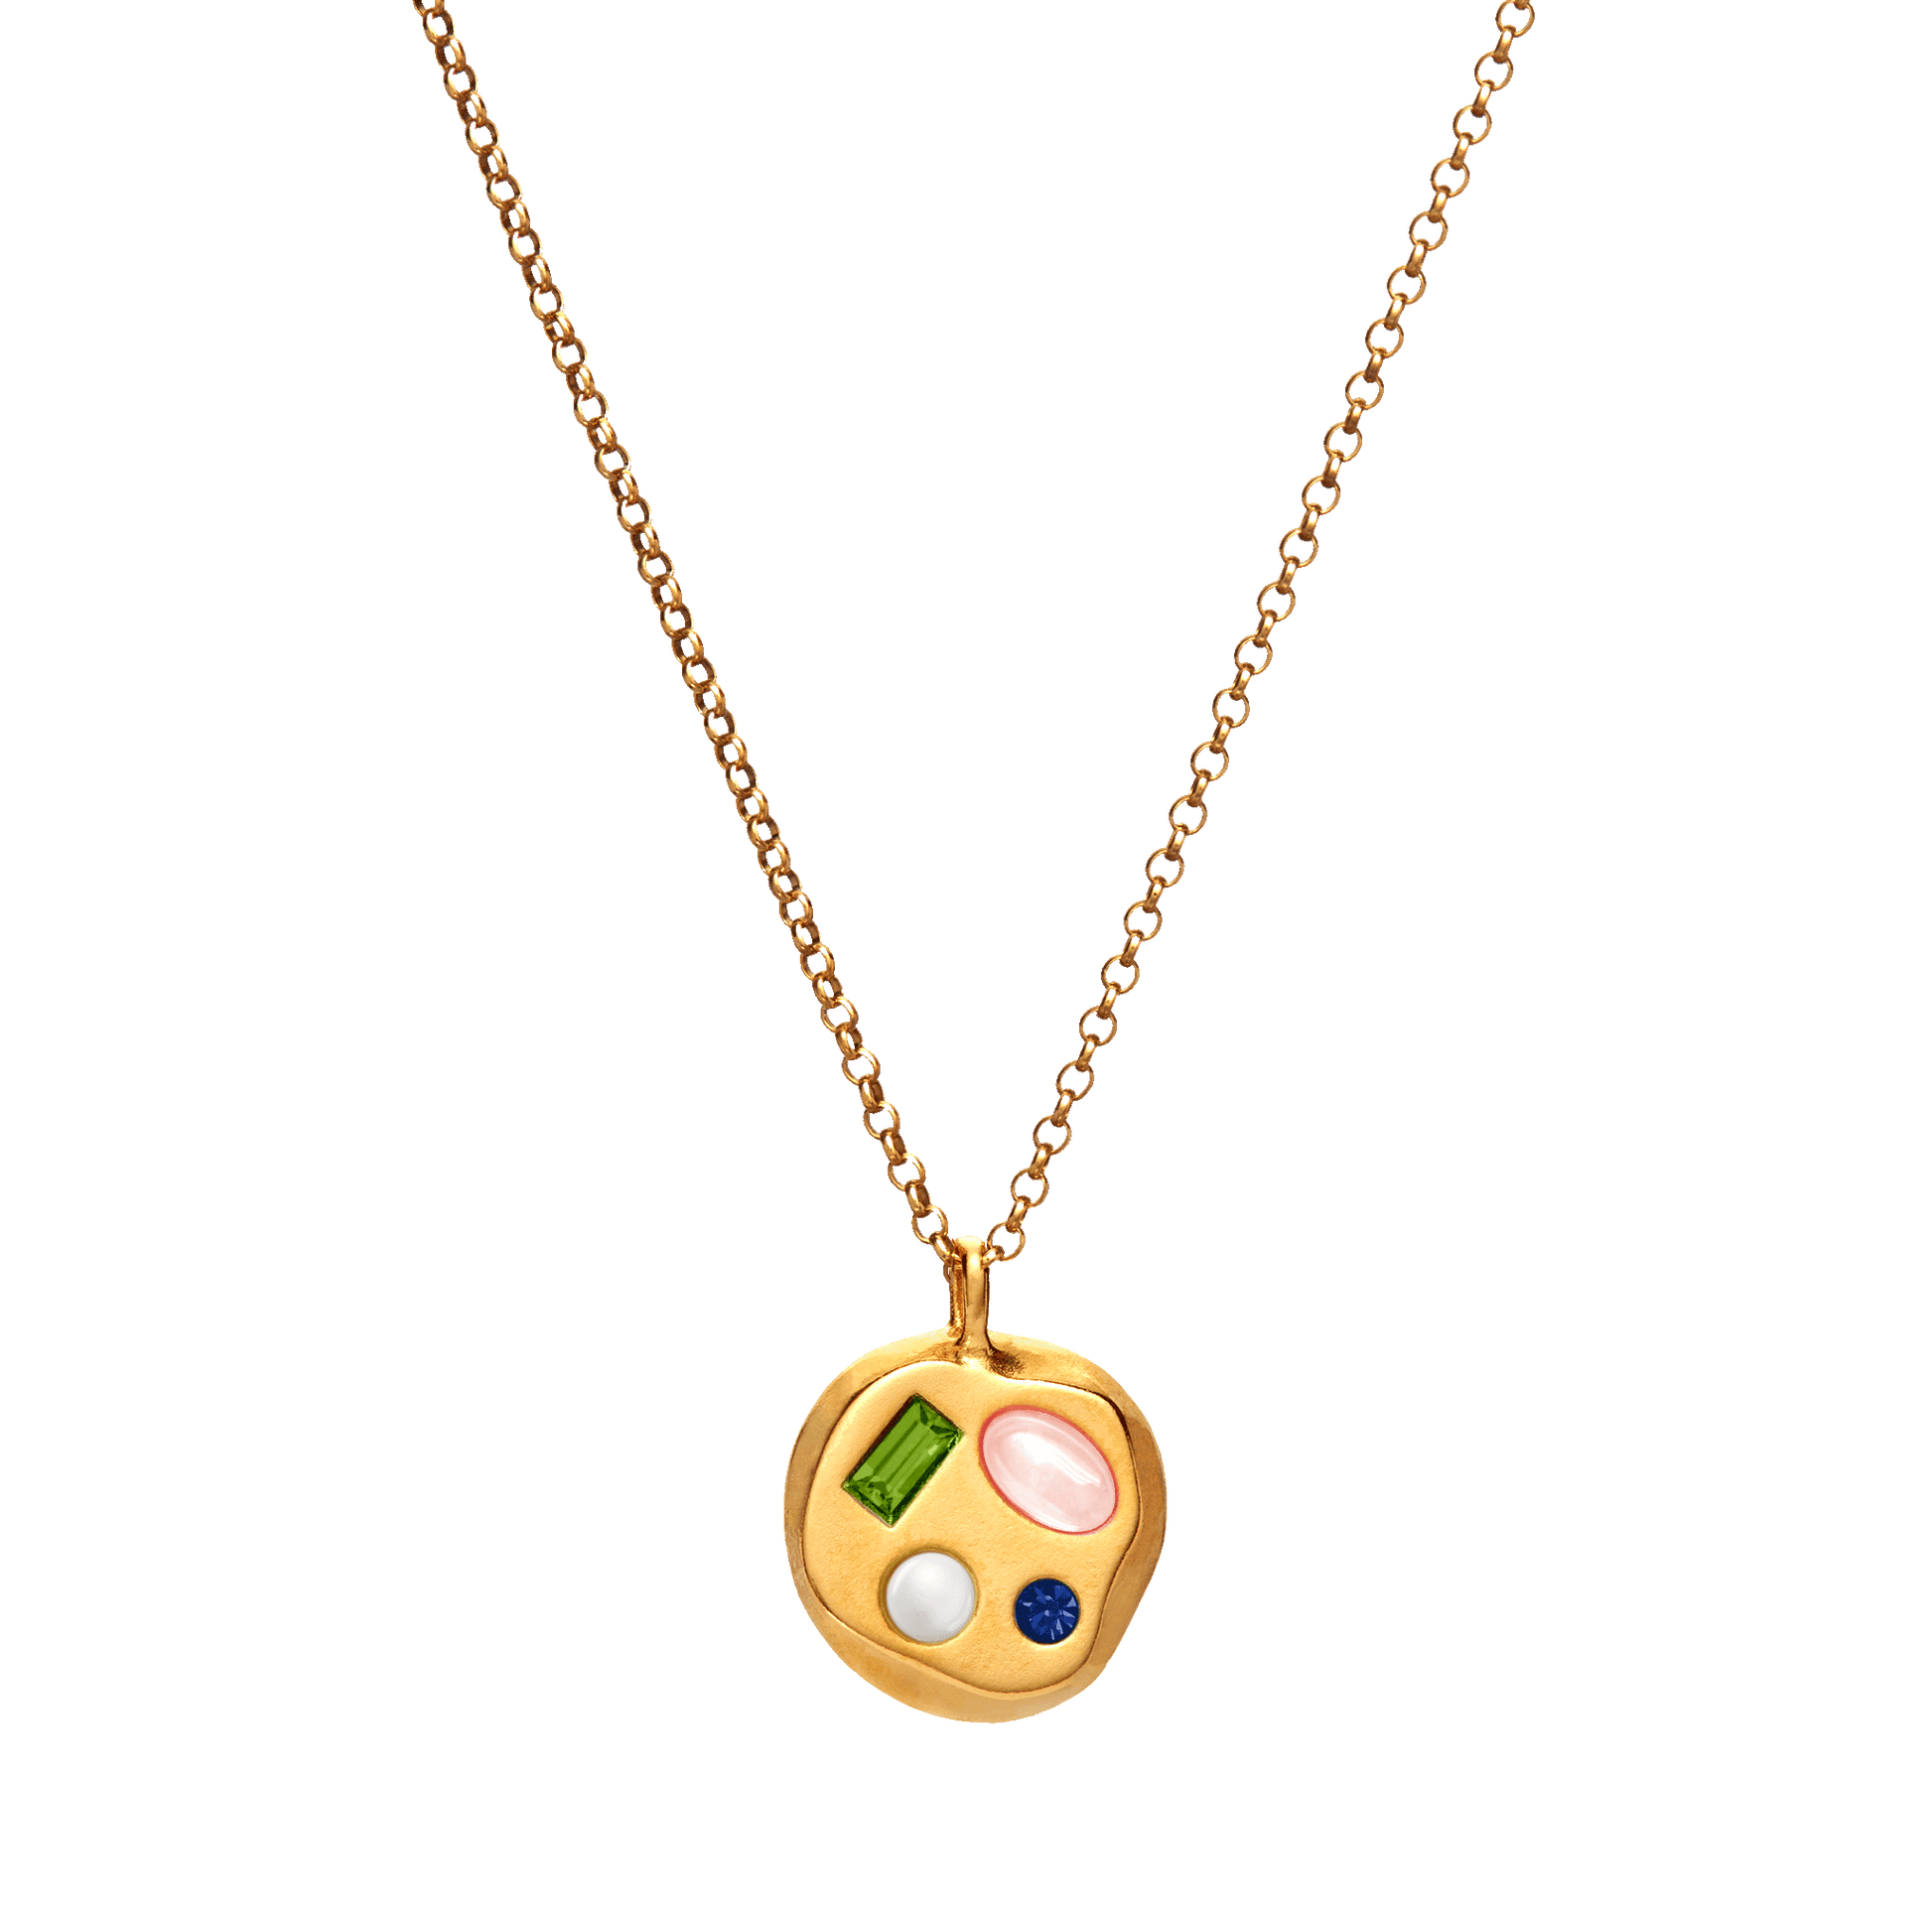 The August Fourth Pendant